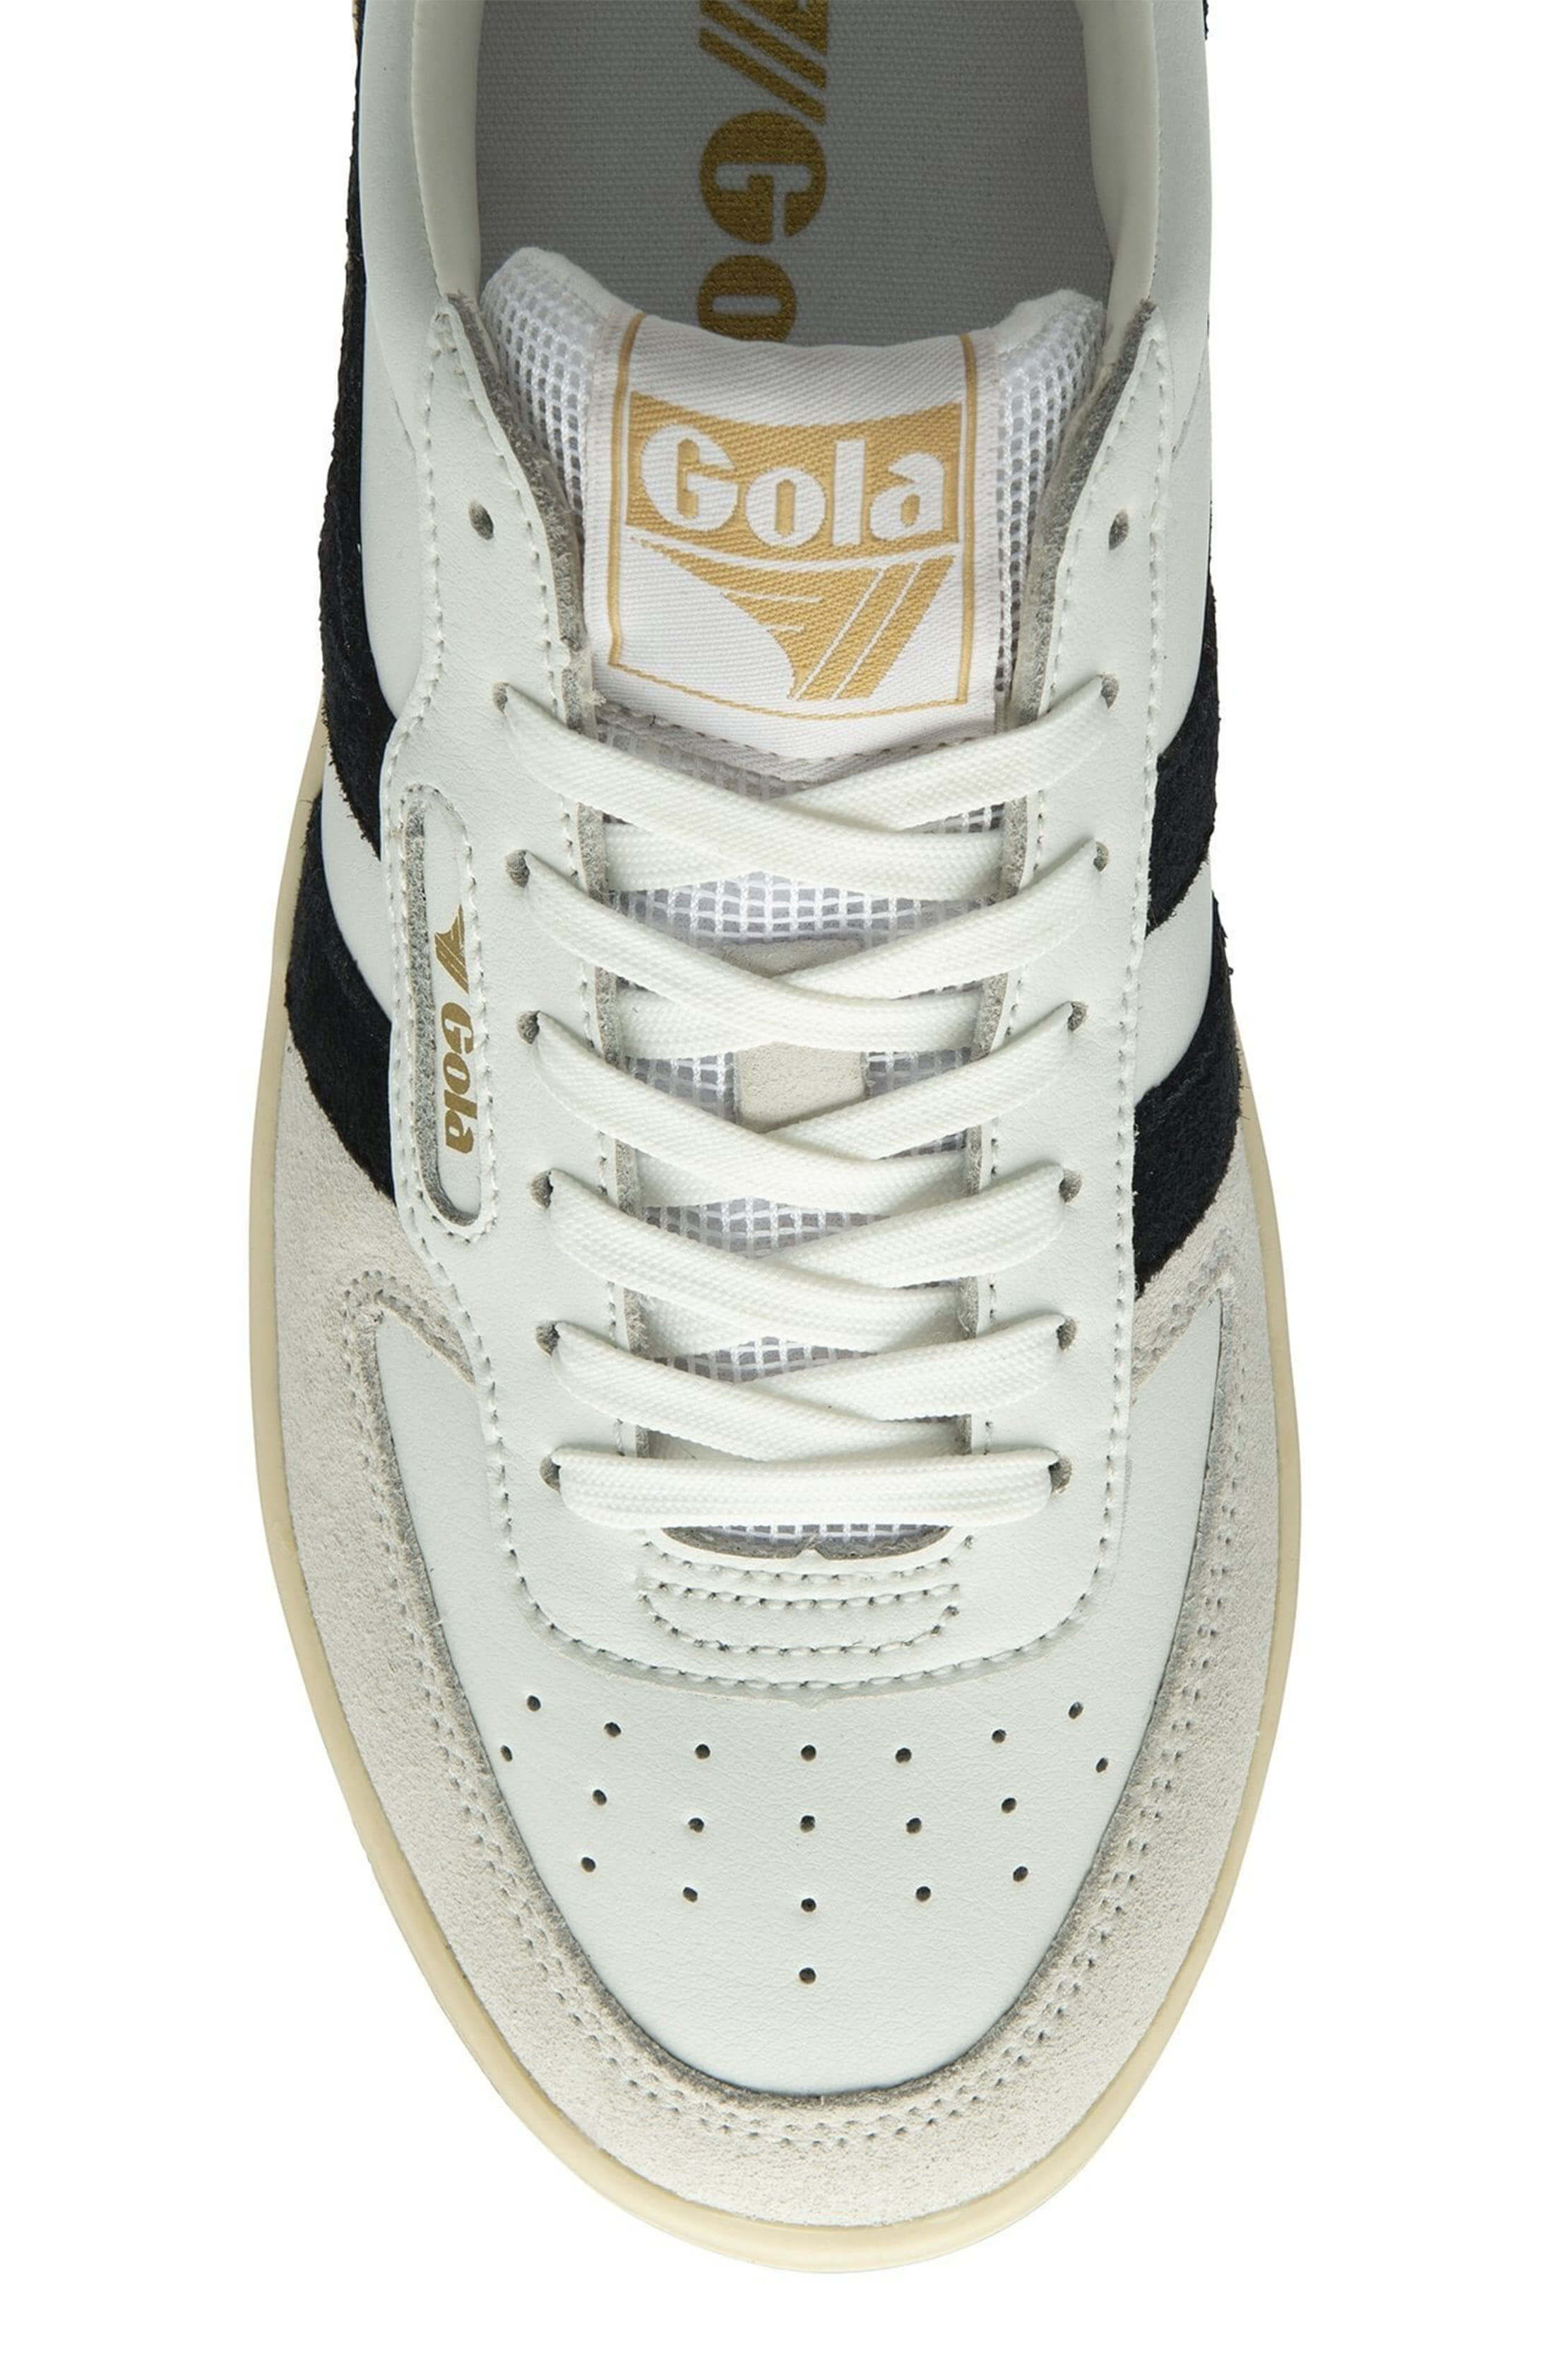 Gola hawk shoe in white black and gold